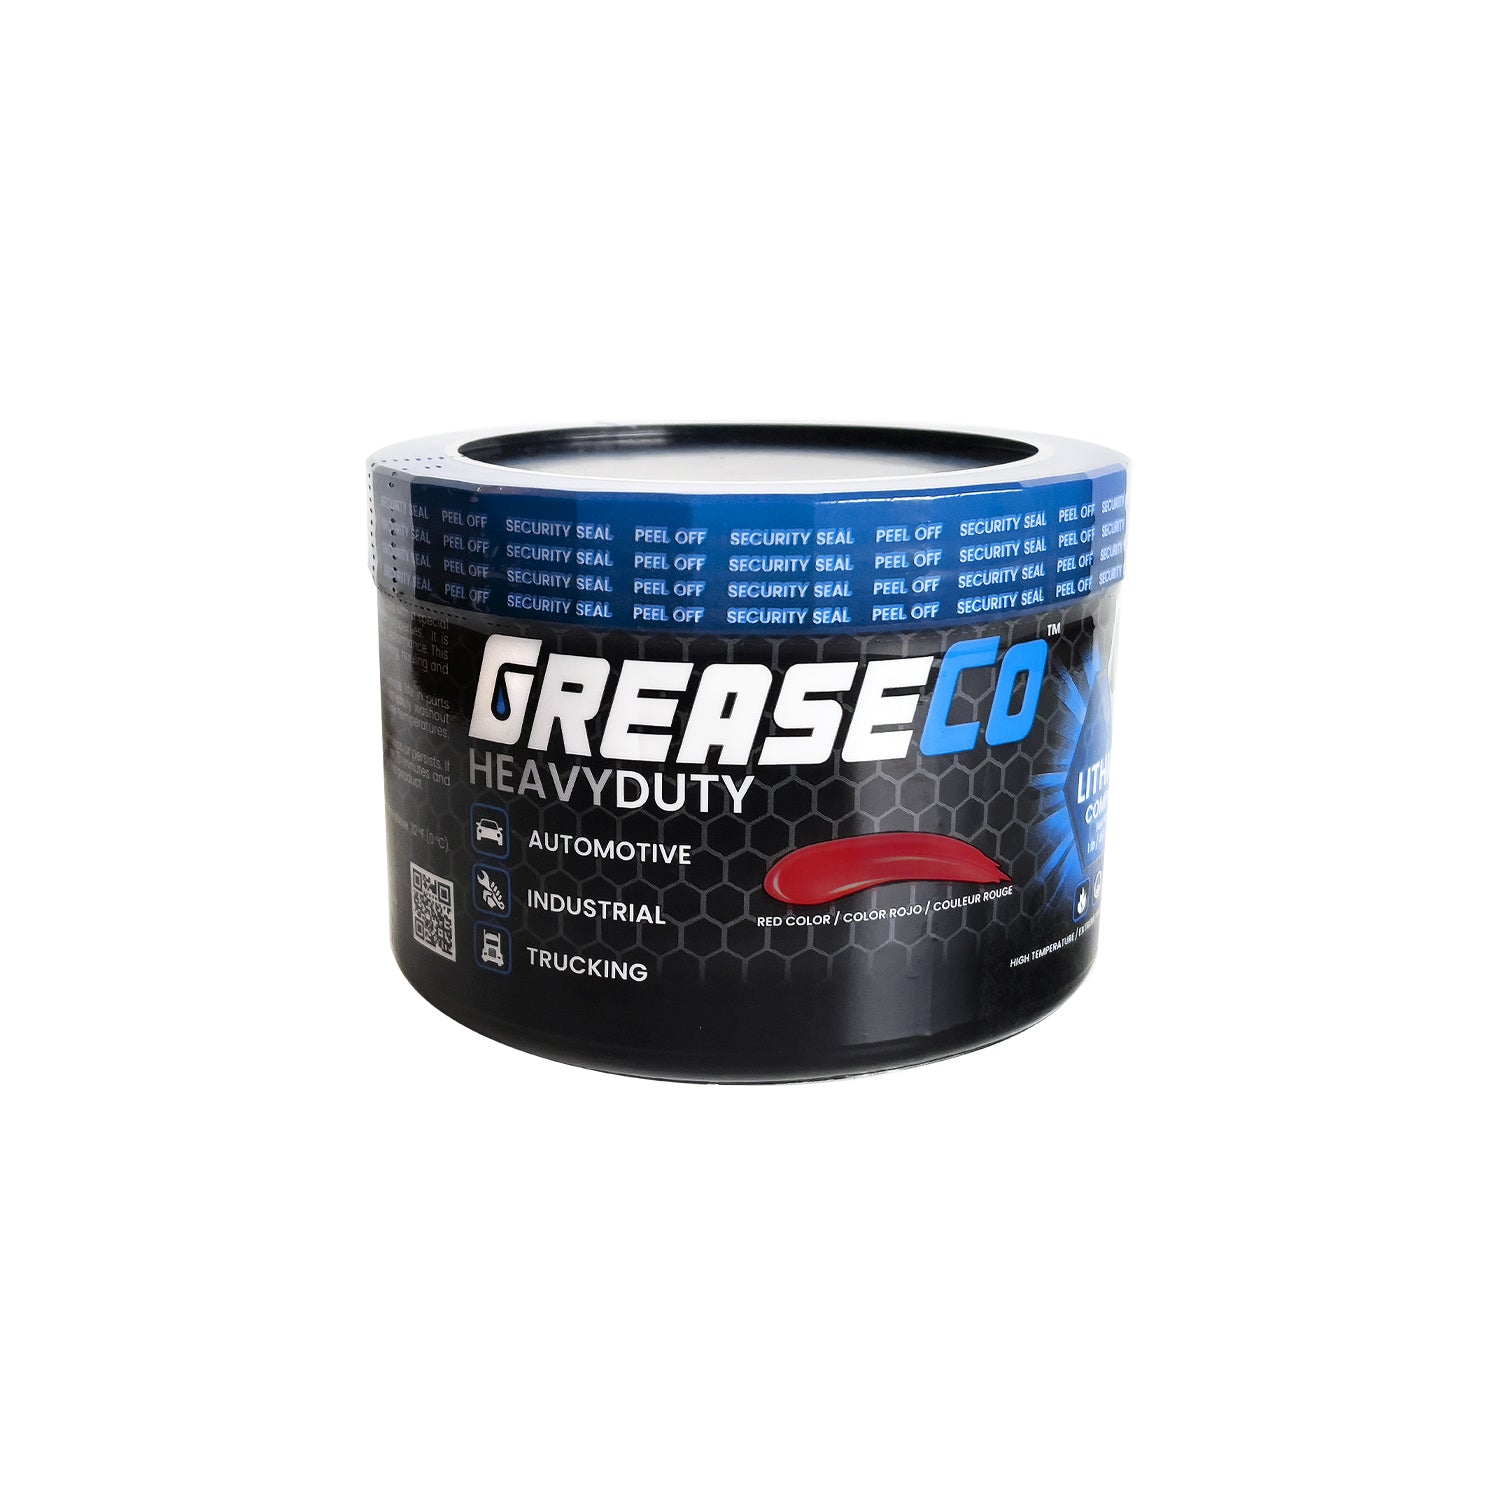 Lithium Complex Wheel Bearing Red and Tacky High Temperature EP Heavy Duty Grease 1 LB Jar Tub of GreaseCo HeavyDuty